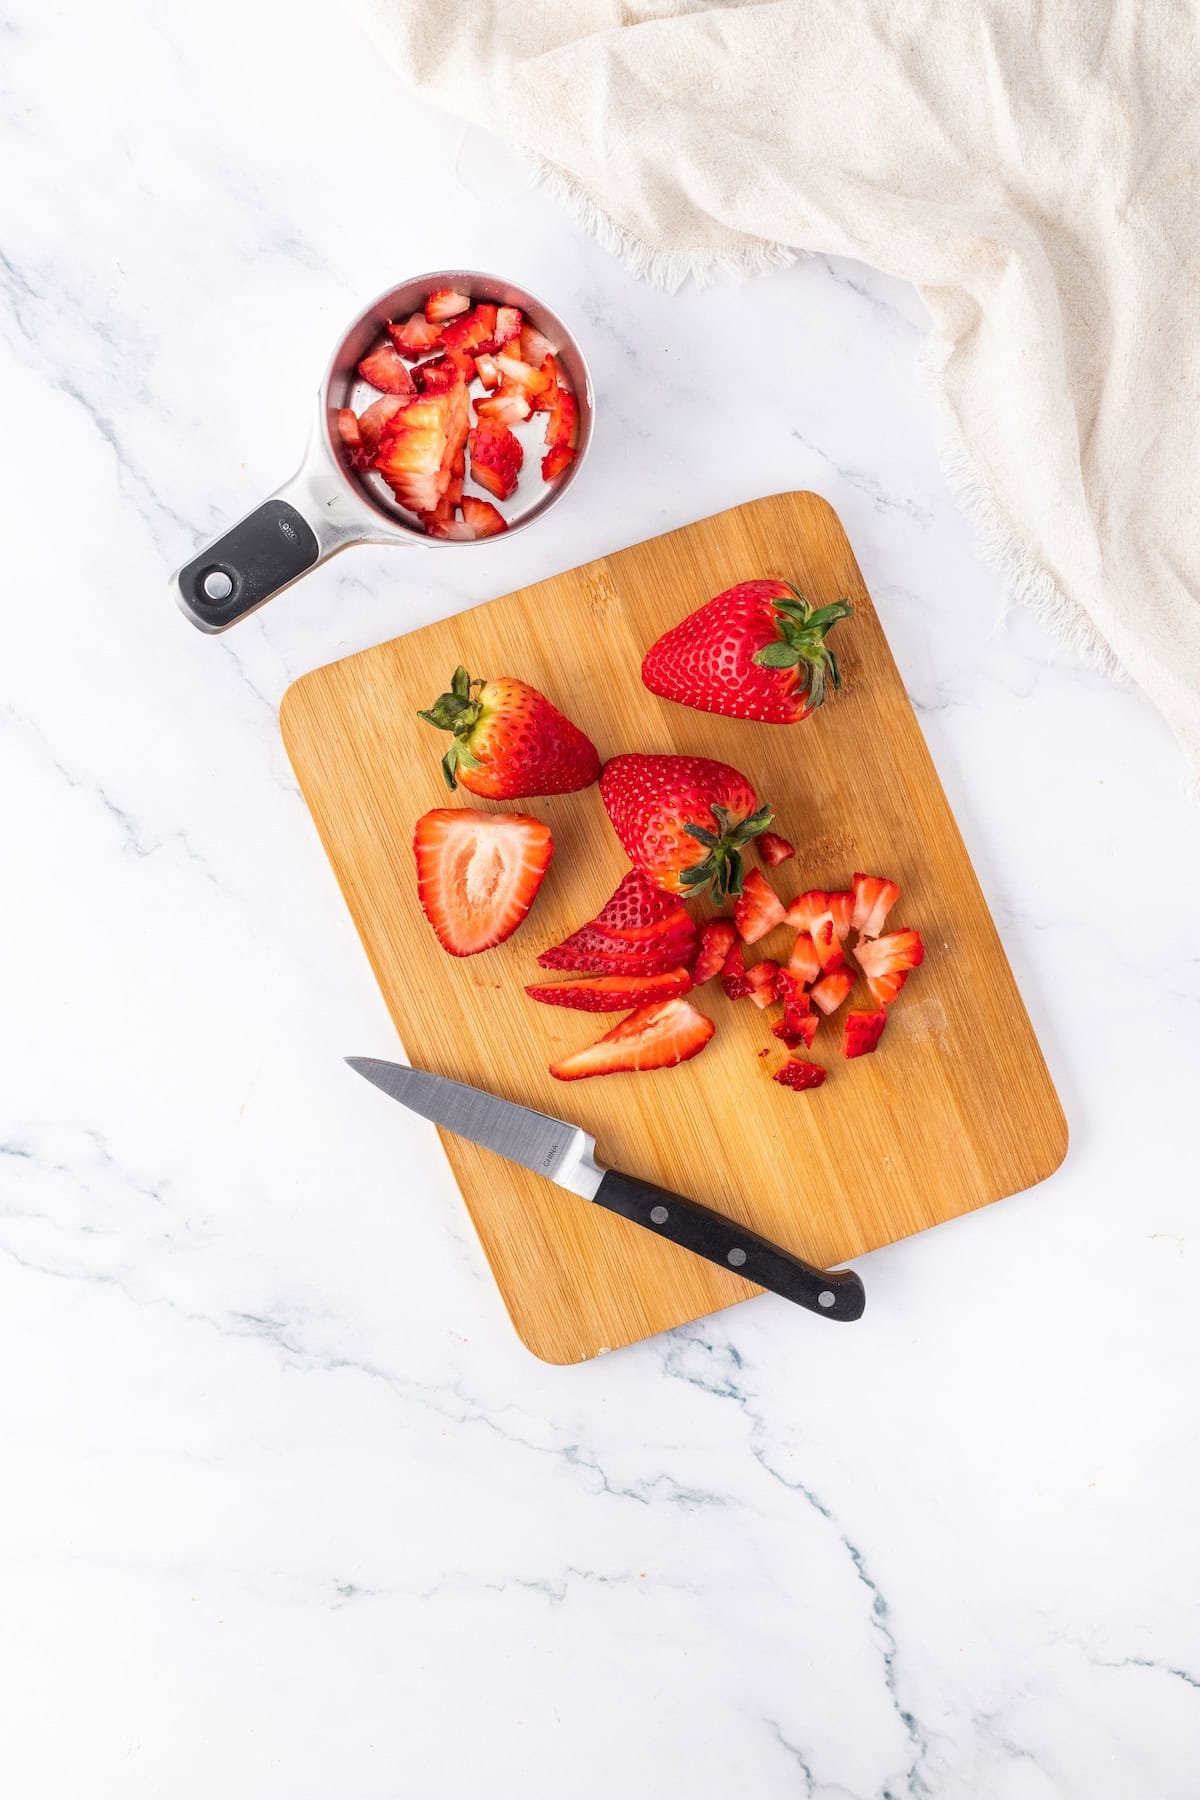 strawberries on a board with some in a measuring cup